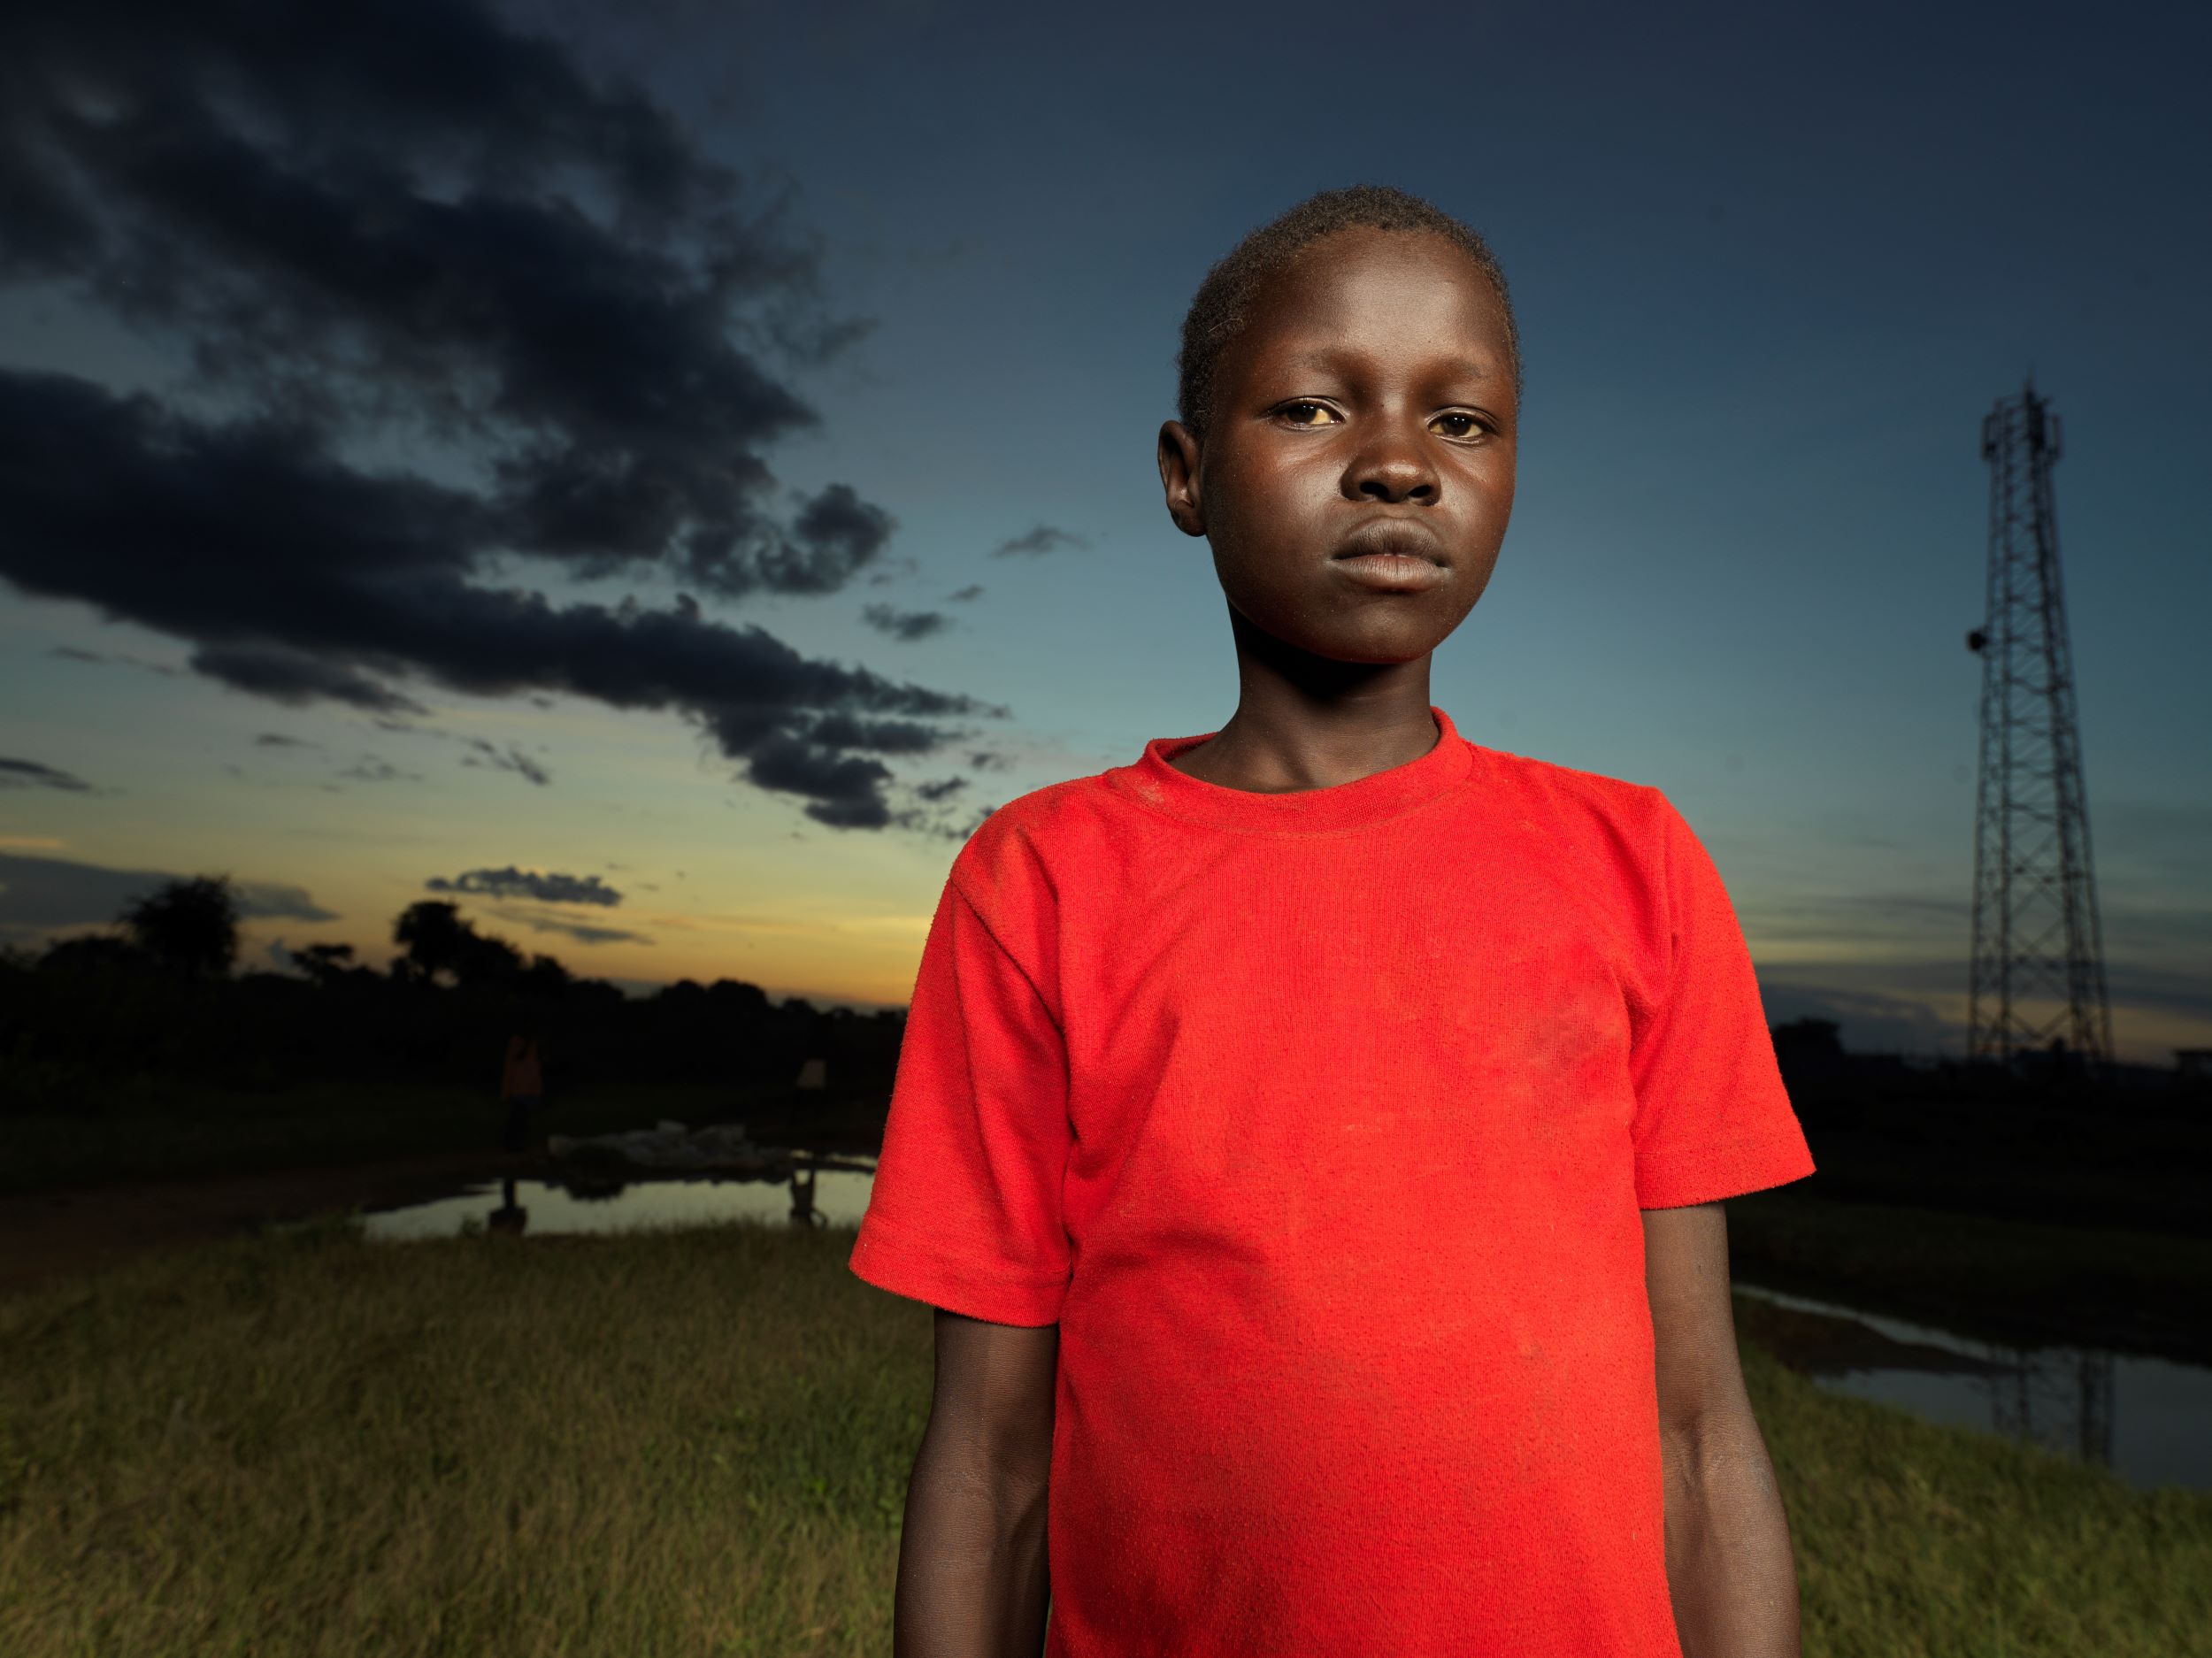 A South Sudanese girl, orphaned and alone at 10